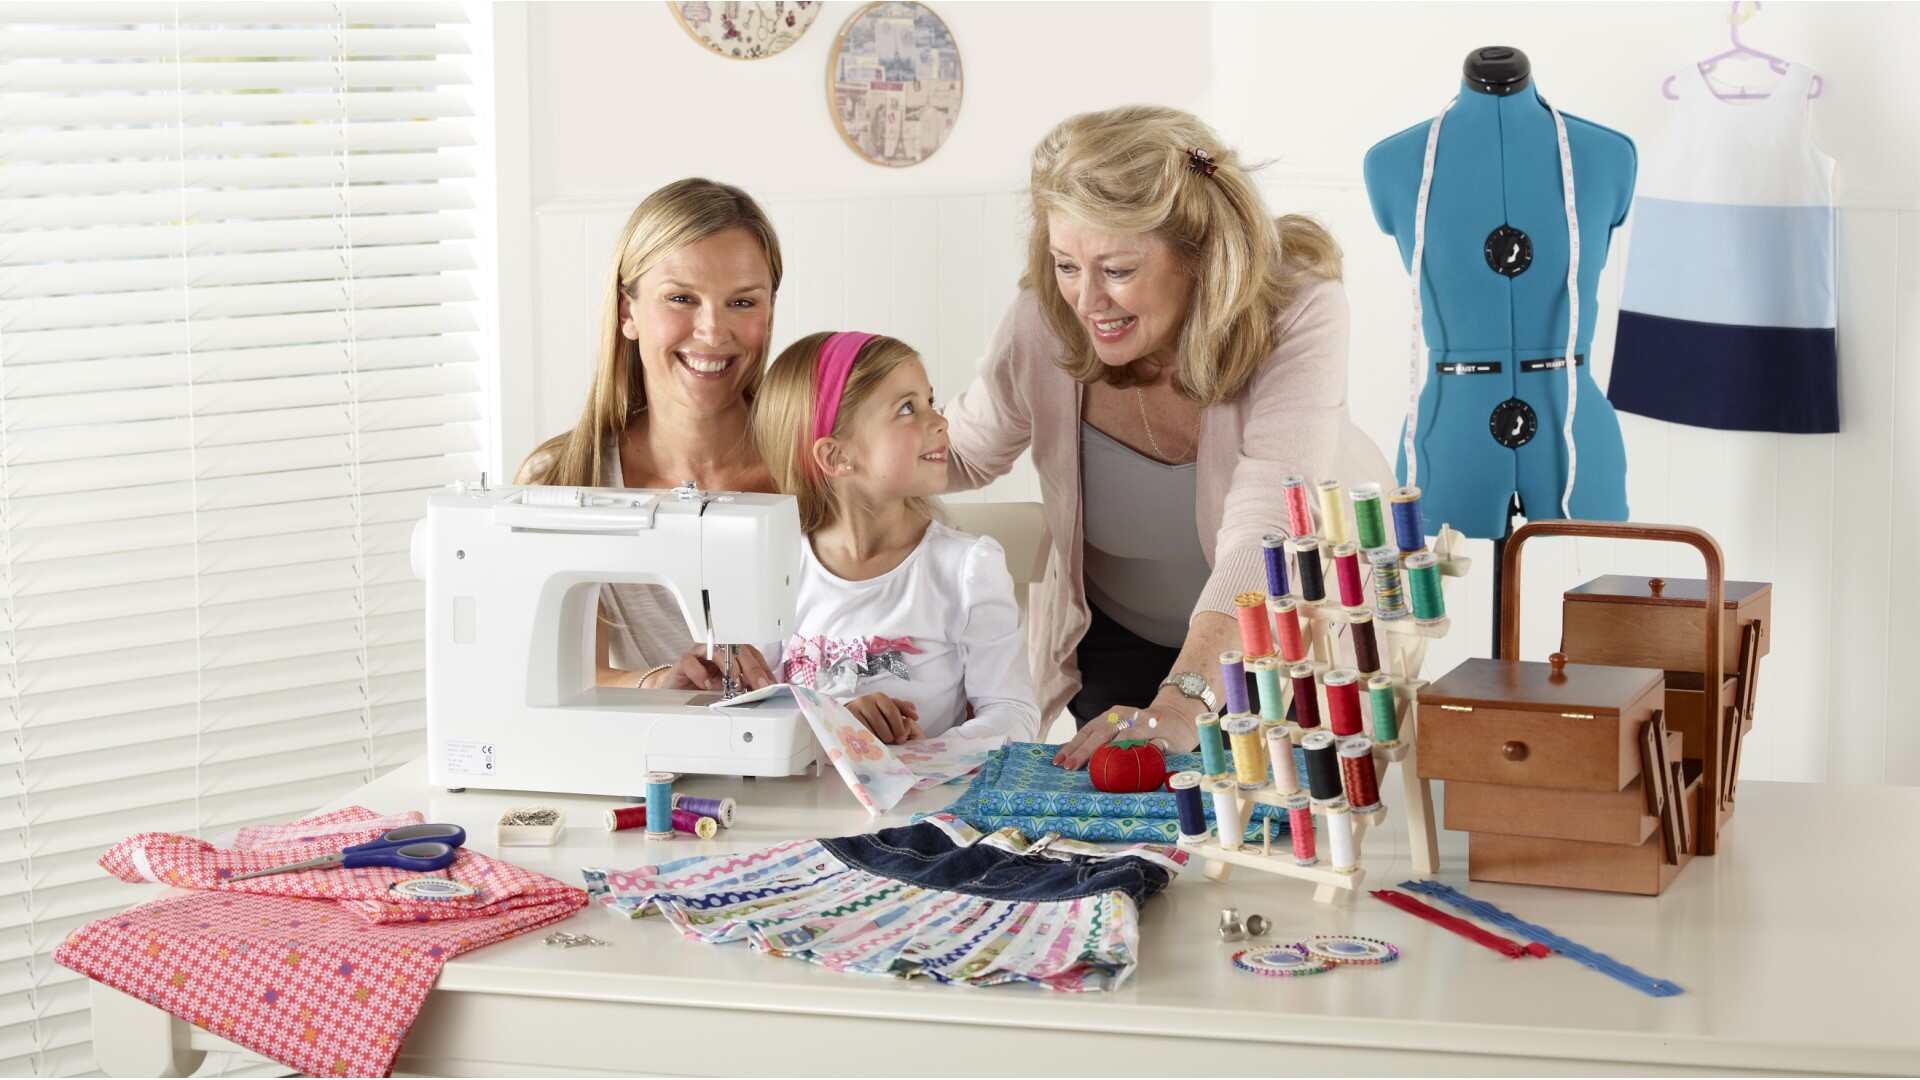 Sewing hobby becomes an American Girl business